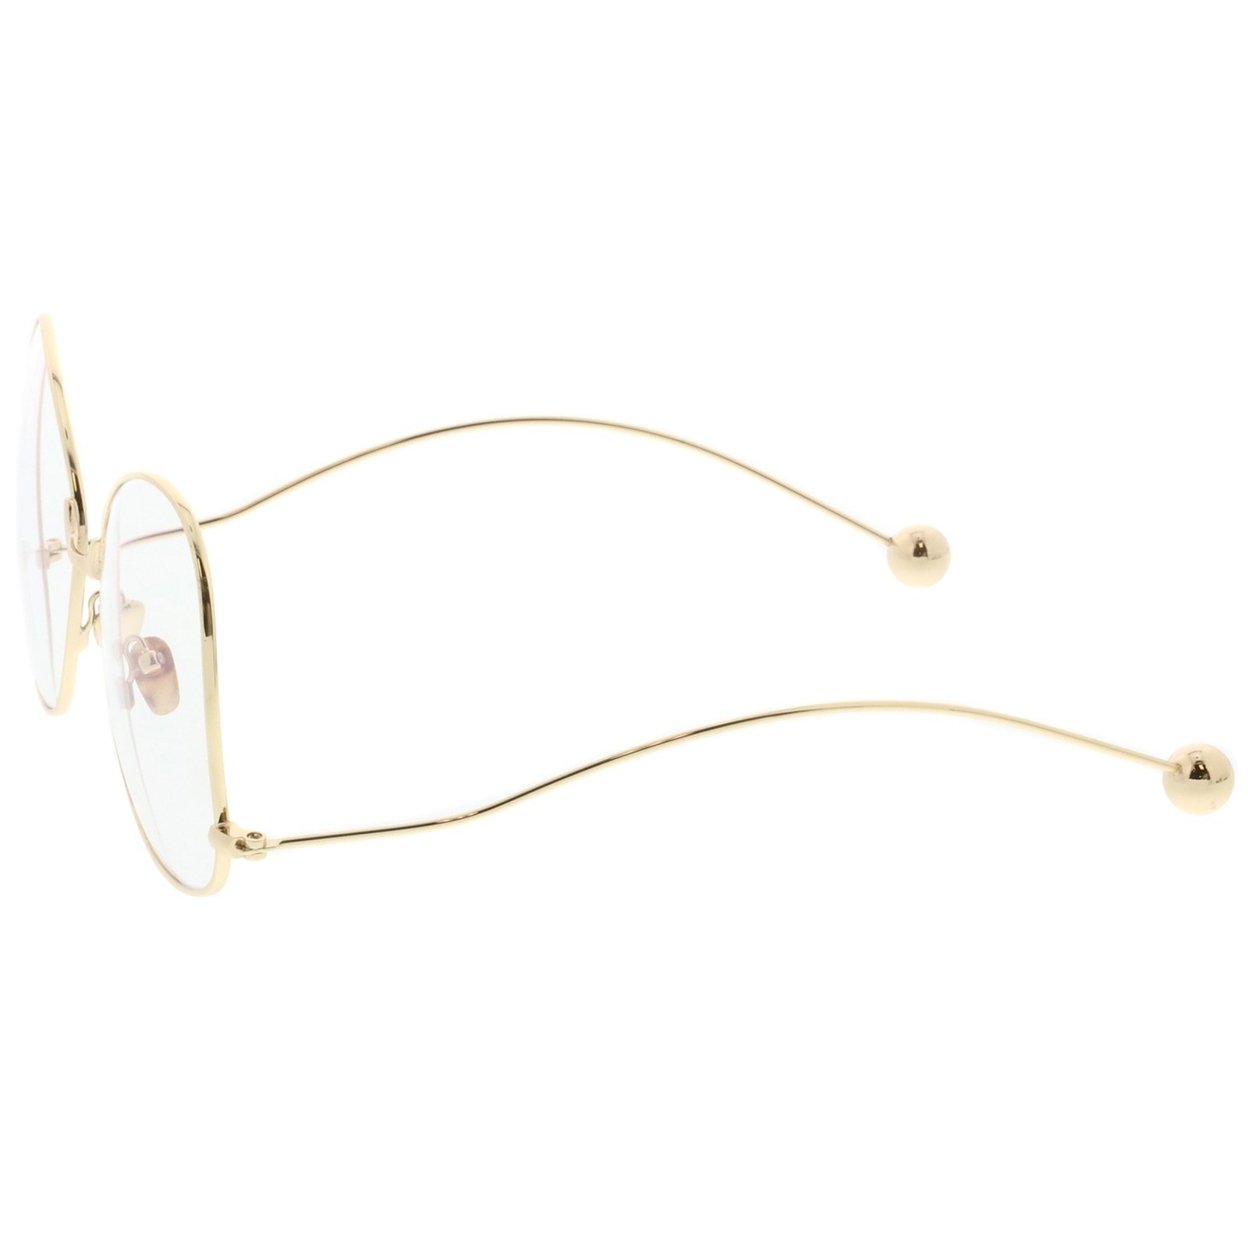 Oversize Butterfly Glasses With Clear Lenses And Thin Metal Arms With Ball Accents - Gold / Clear